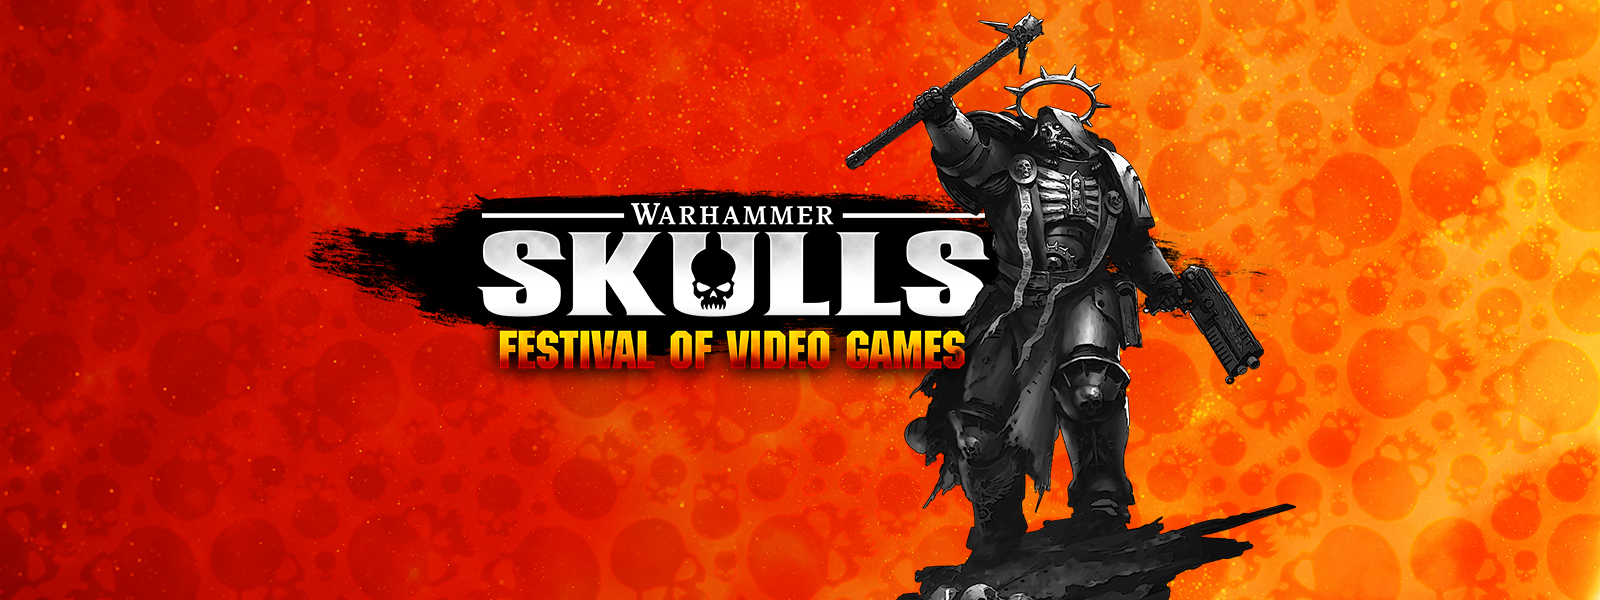 Warhammer Skulls Festival of Video Games, a Warhammer character raising their weapon in front of a red background covered with skulls.